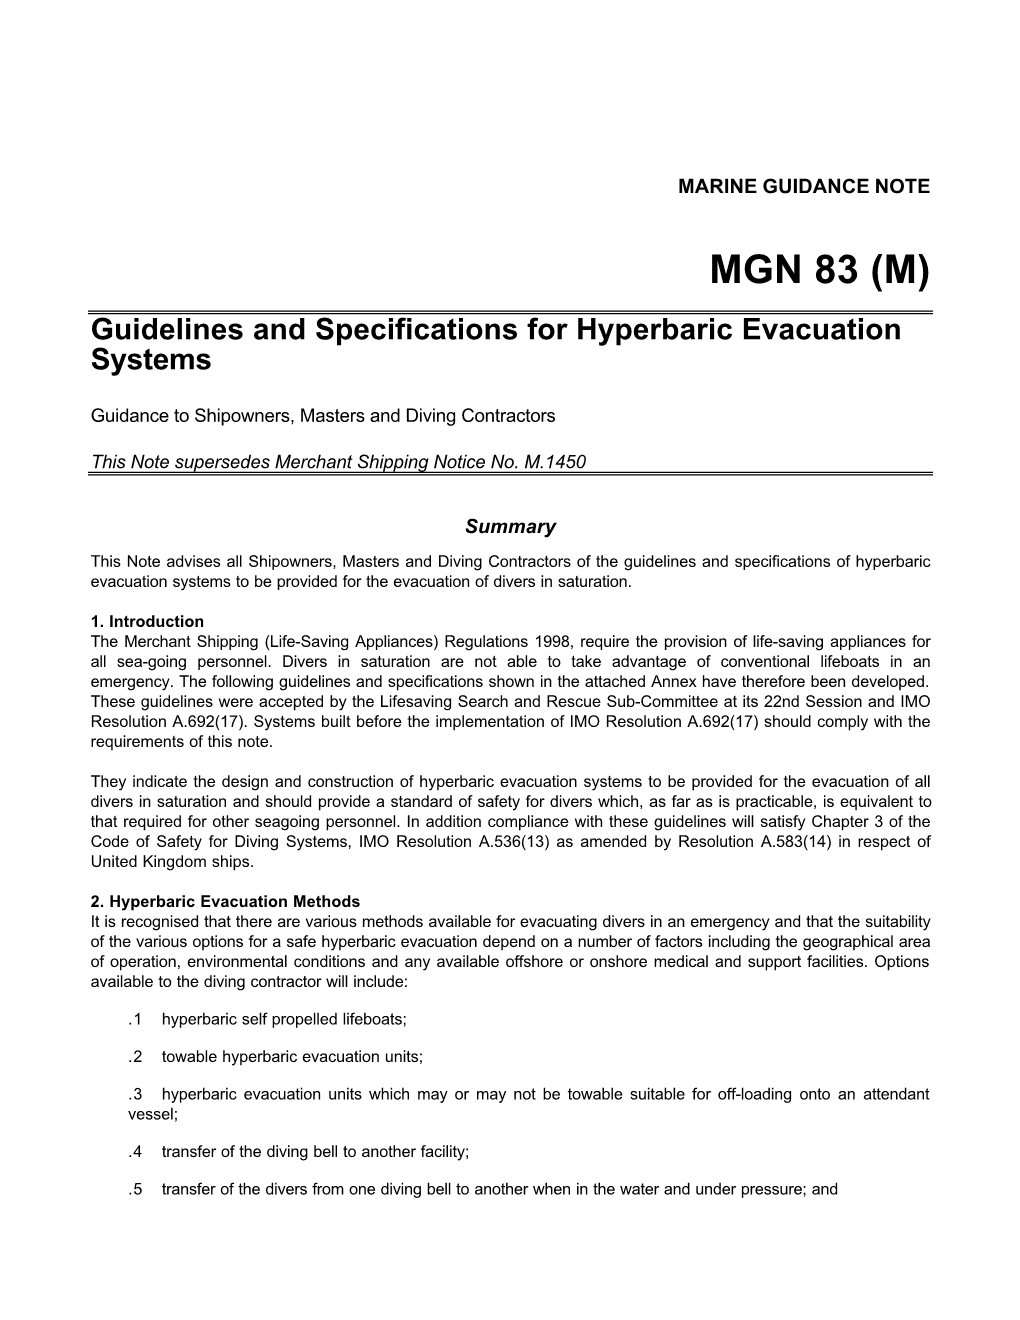 MGN 83 (M) Guidelines and Specifications for Hyperbaric Evacuation Systems